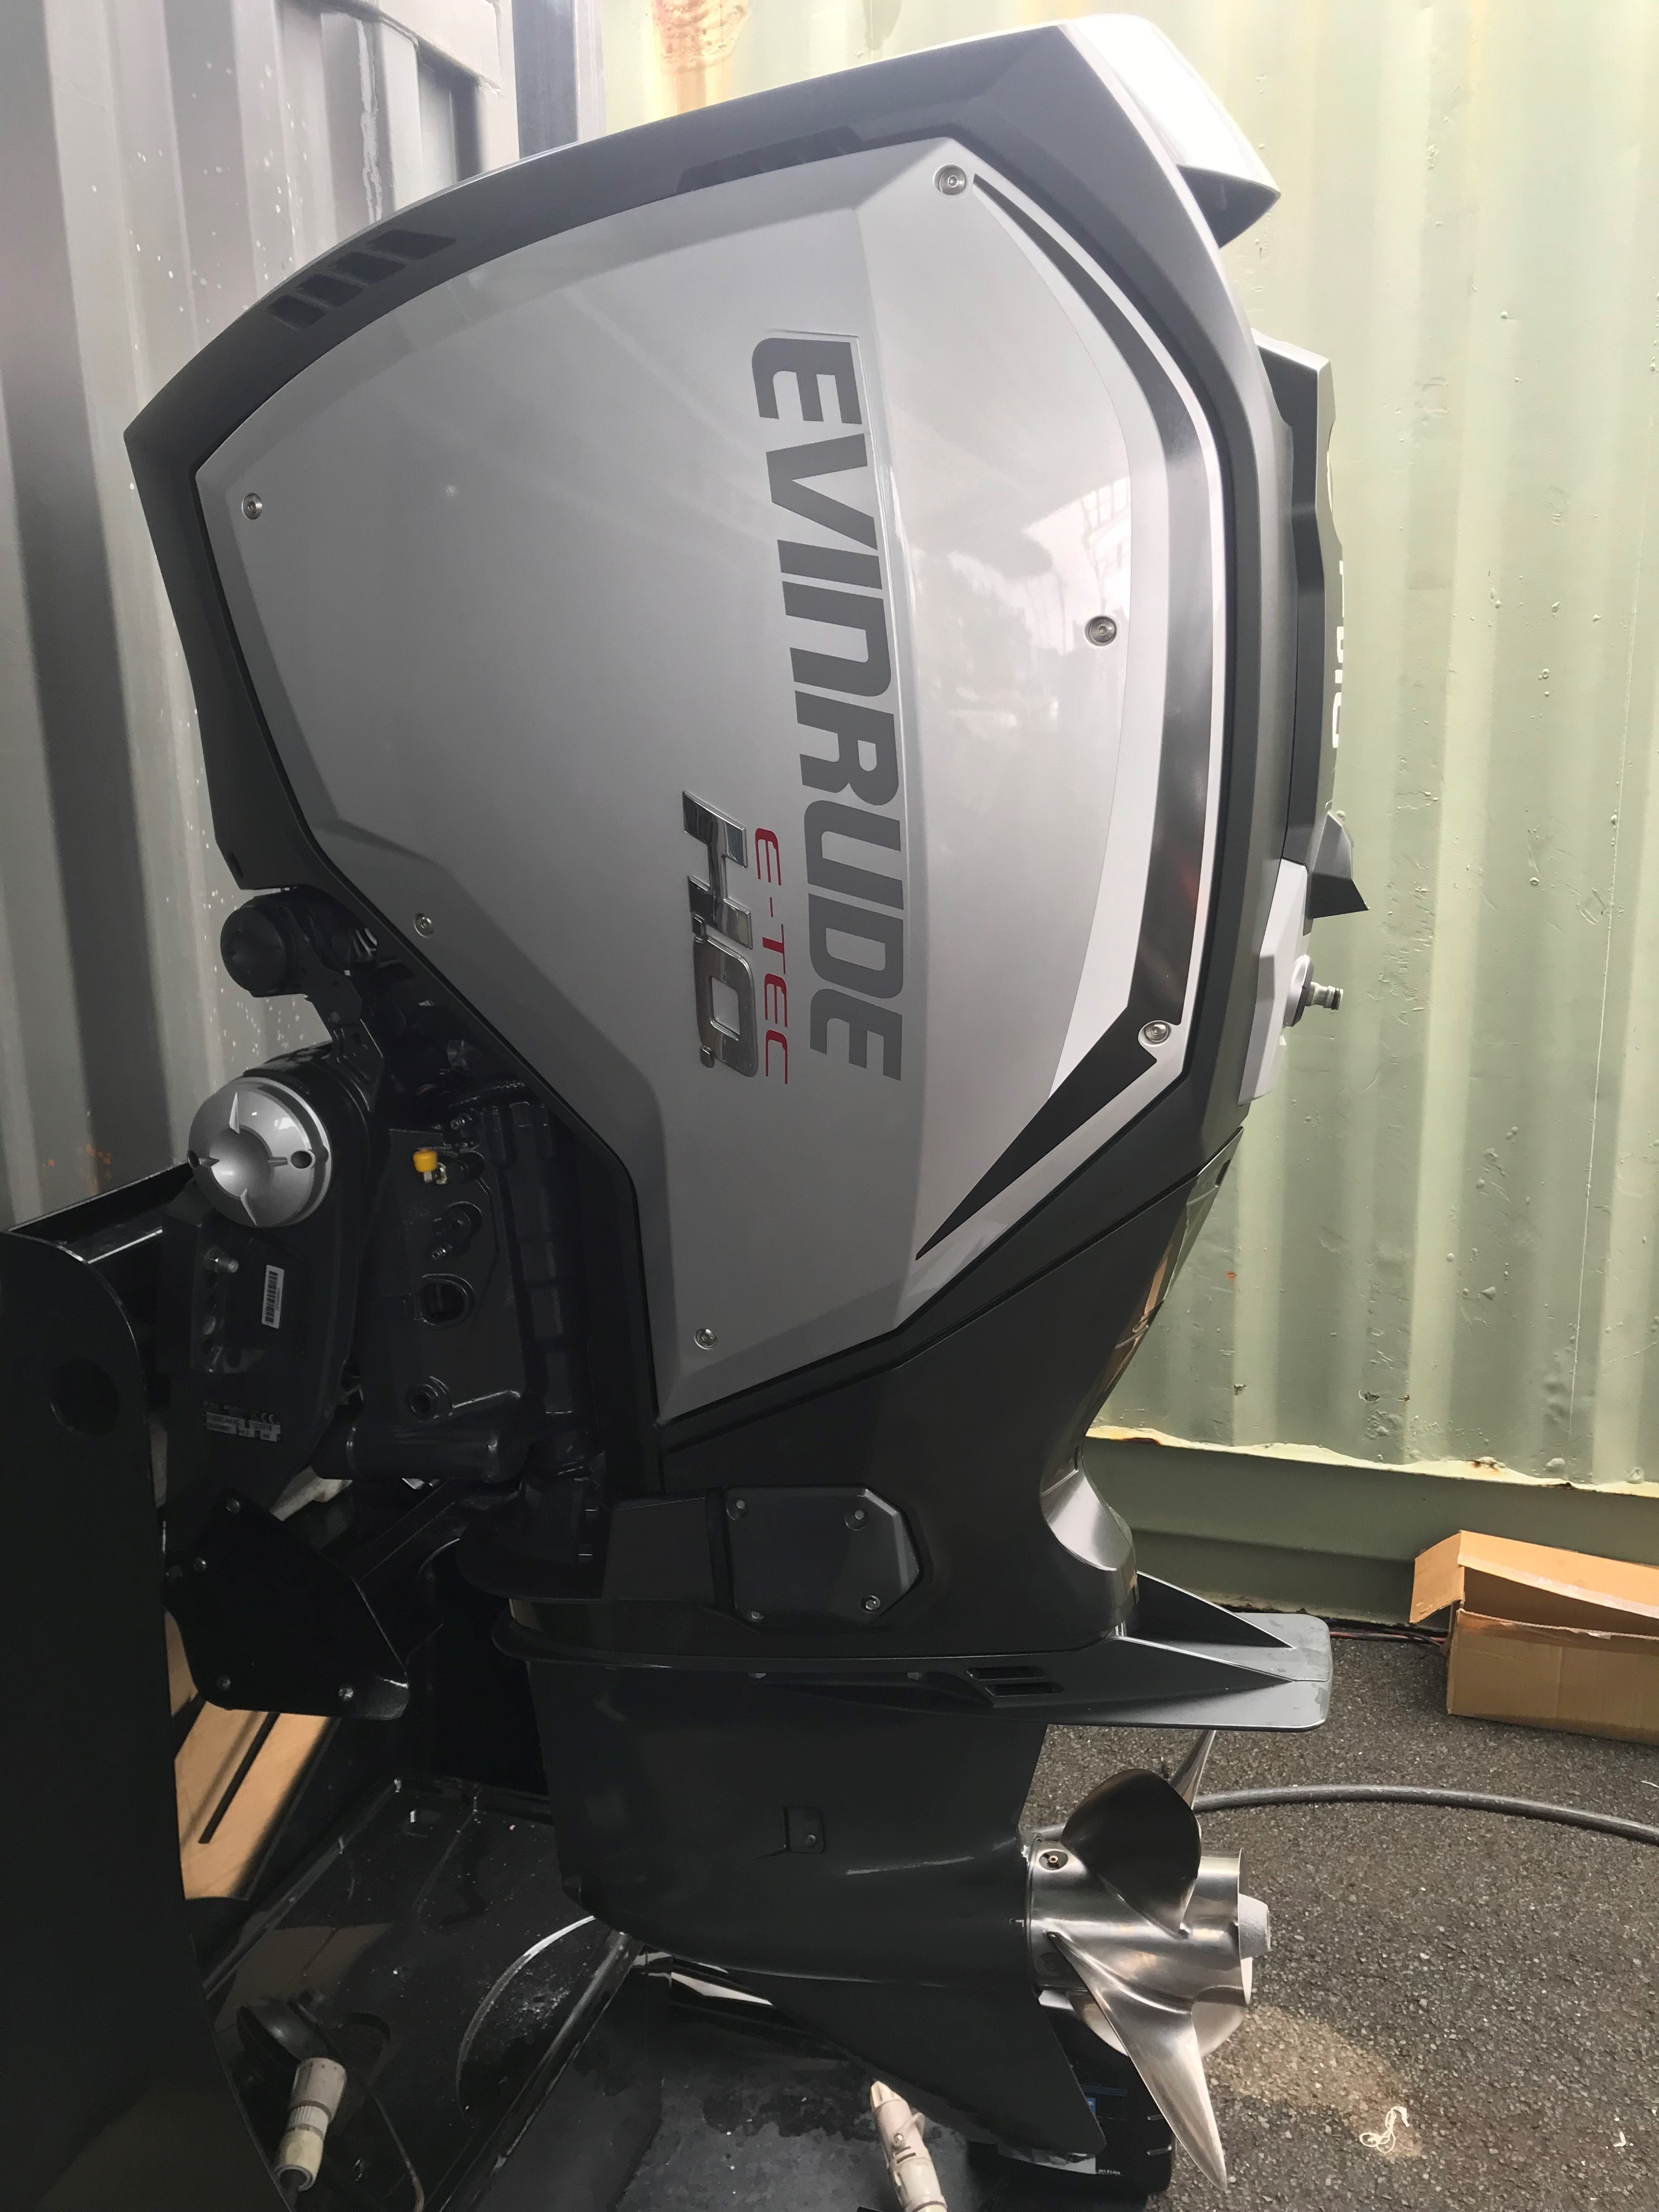 Used 2017 Evinrude C150FLH High Output ETEC G2 Outboard